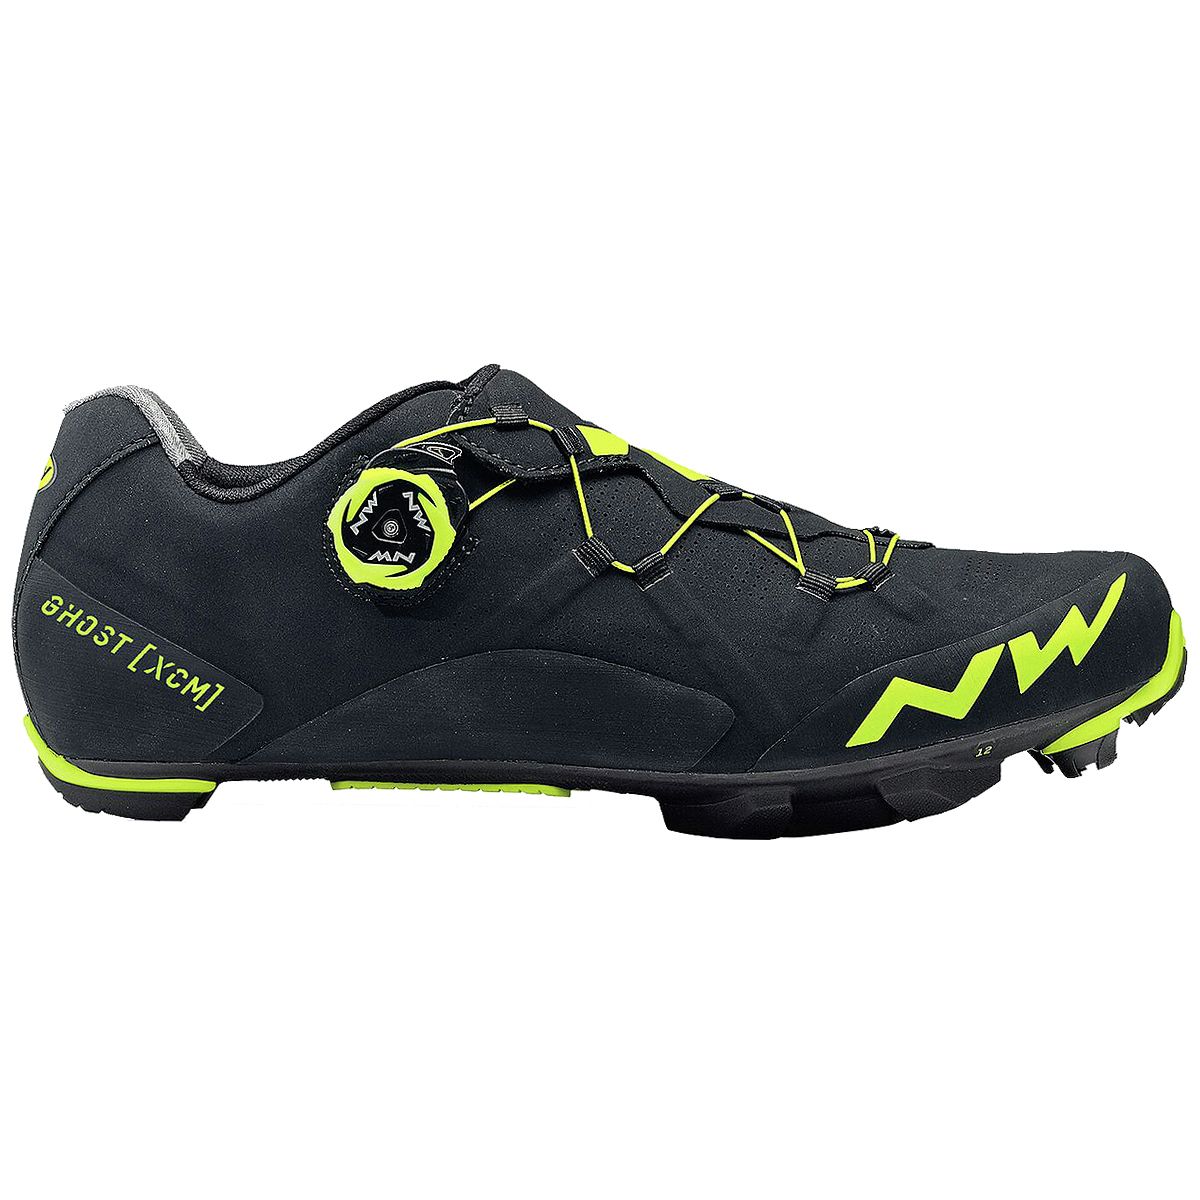 Northwave Ghost XCM Cycling Shoe - Men's